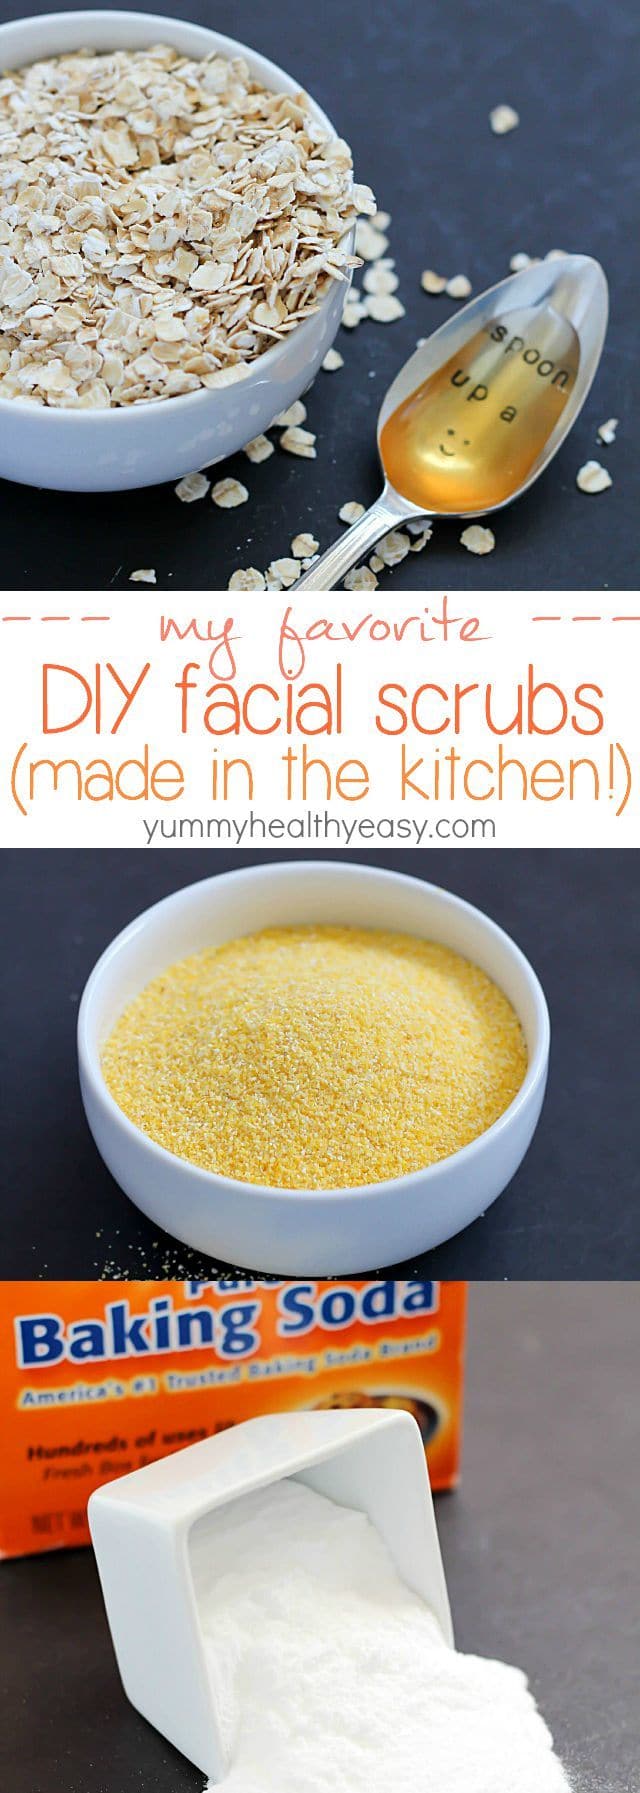 Ditch the expensive exfoliating creams and try these homemade facial scrubs! They're more natural and just as effective at removing dirt, oil and dead skin from your face - all made from simple ingredients in your kitchen!